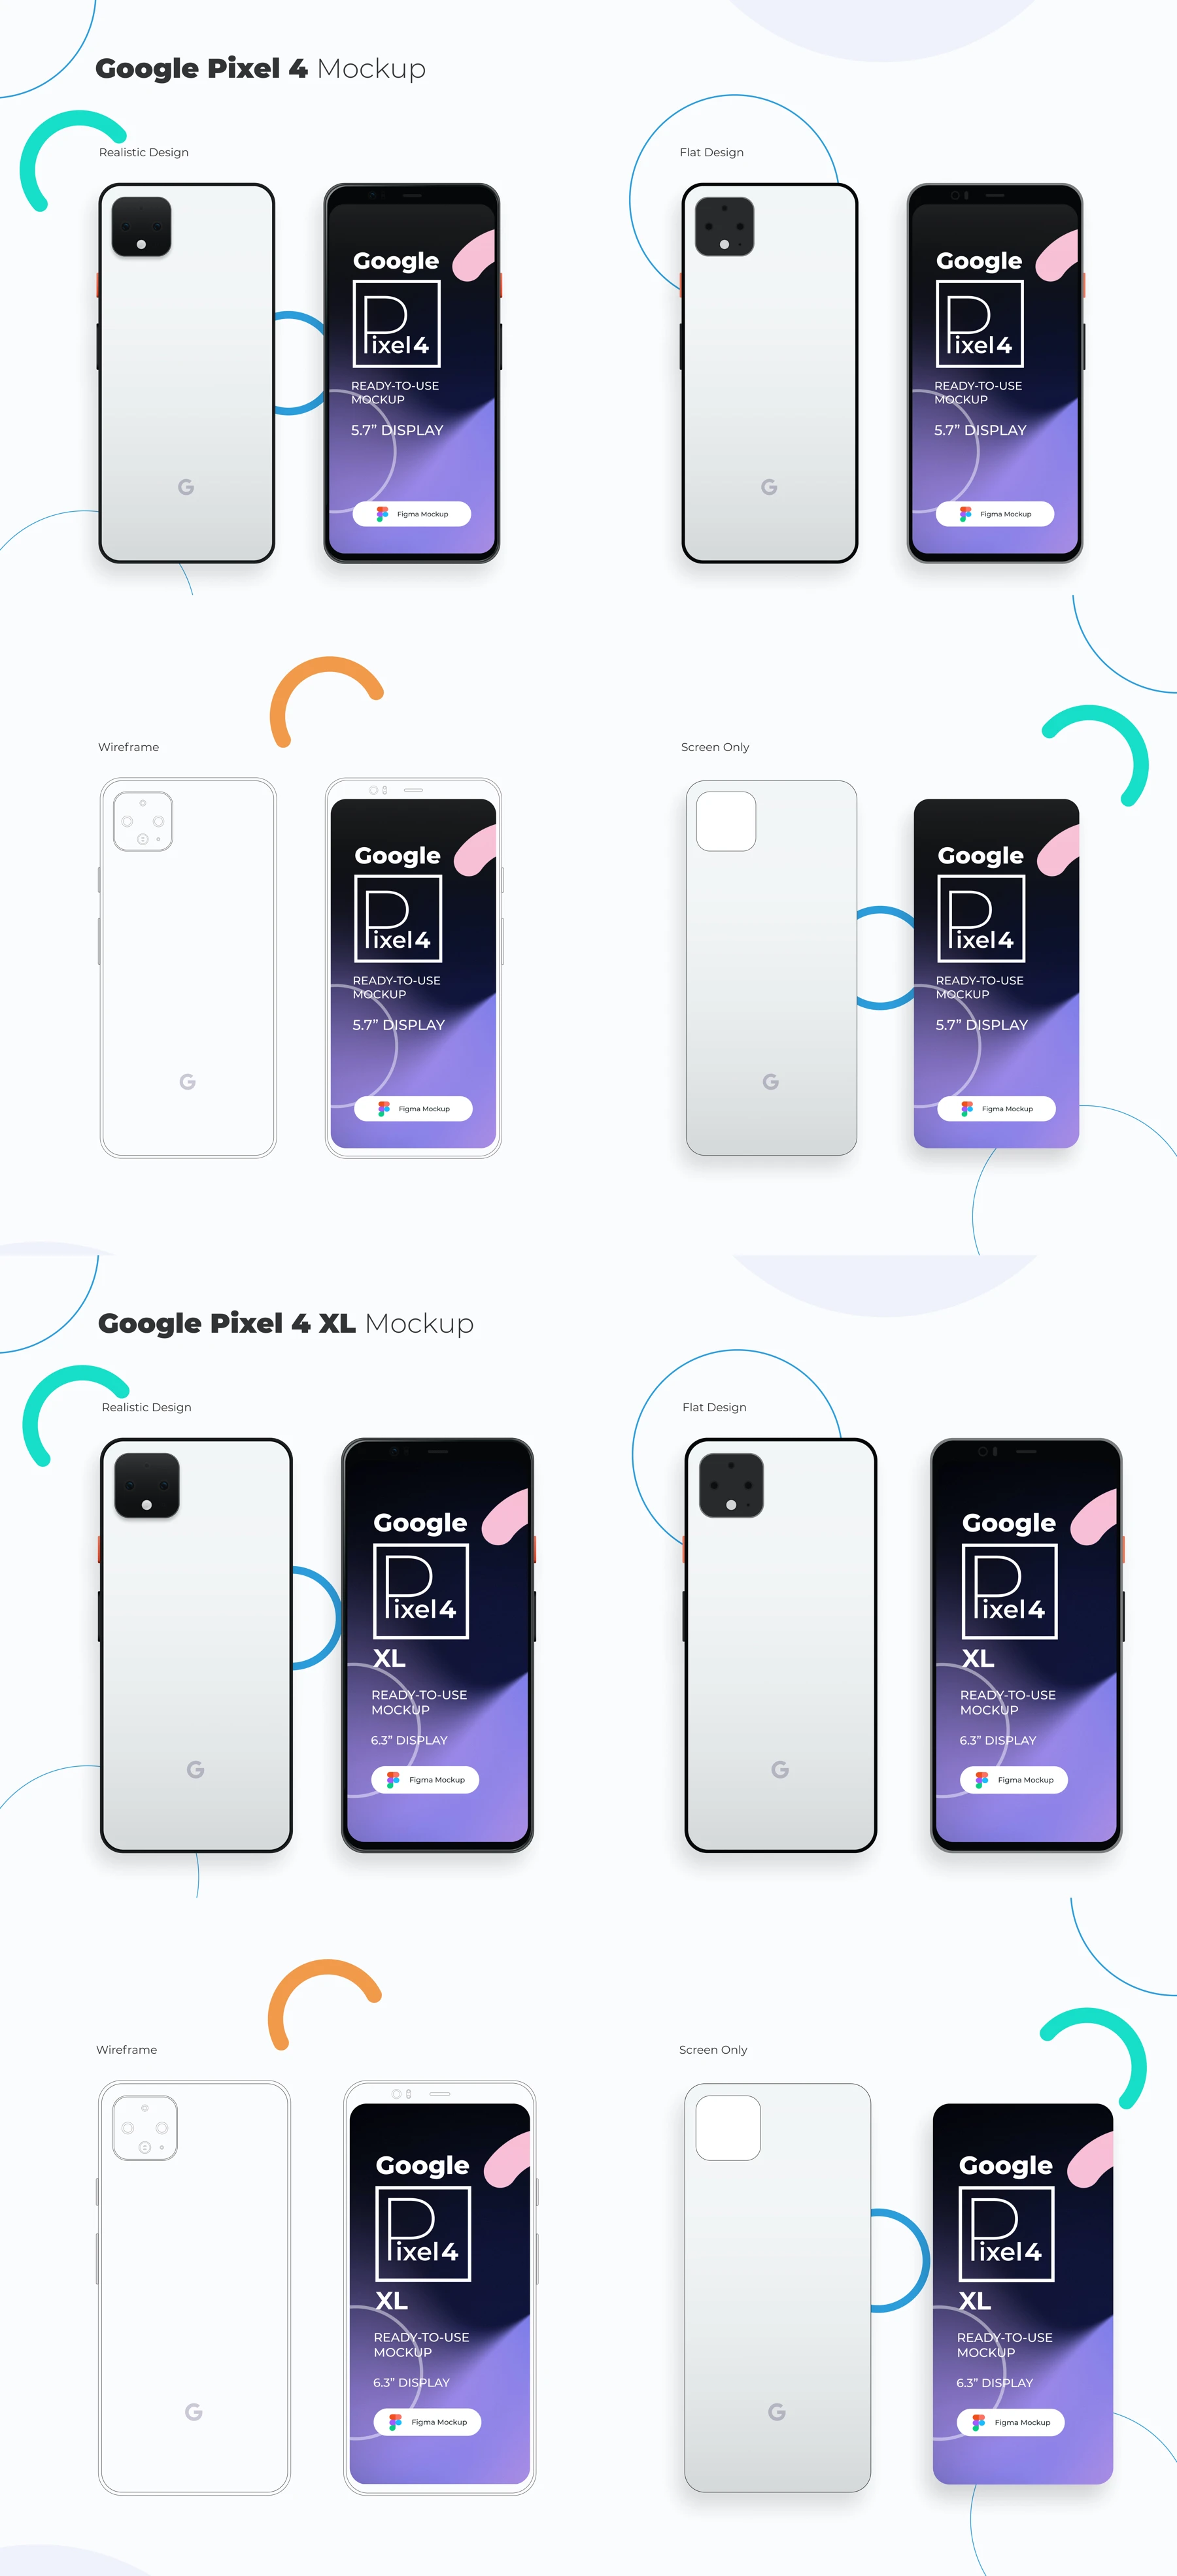 Google Pixel 4 and 4 XL mockup for Figma - Hope this will help you to design and present your UI design for mobile devices.